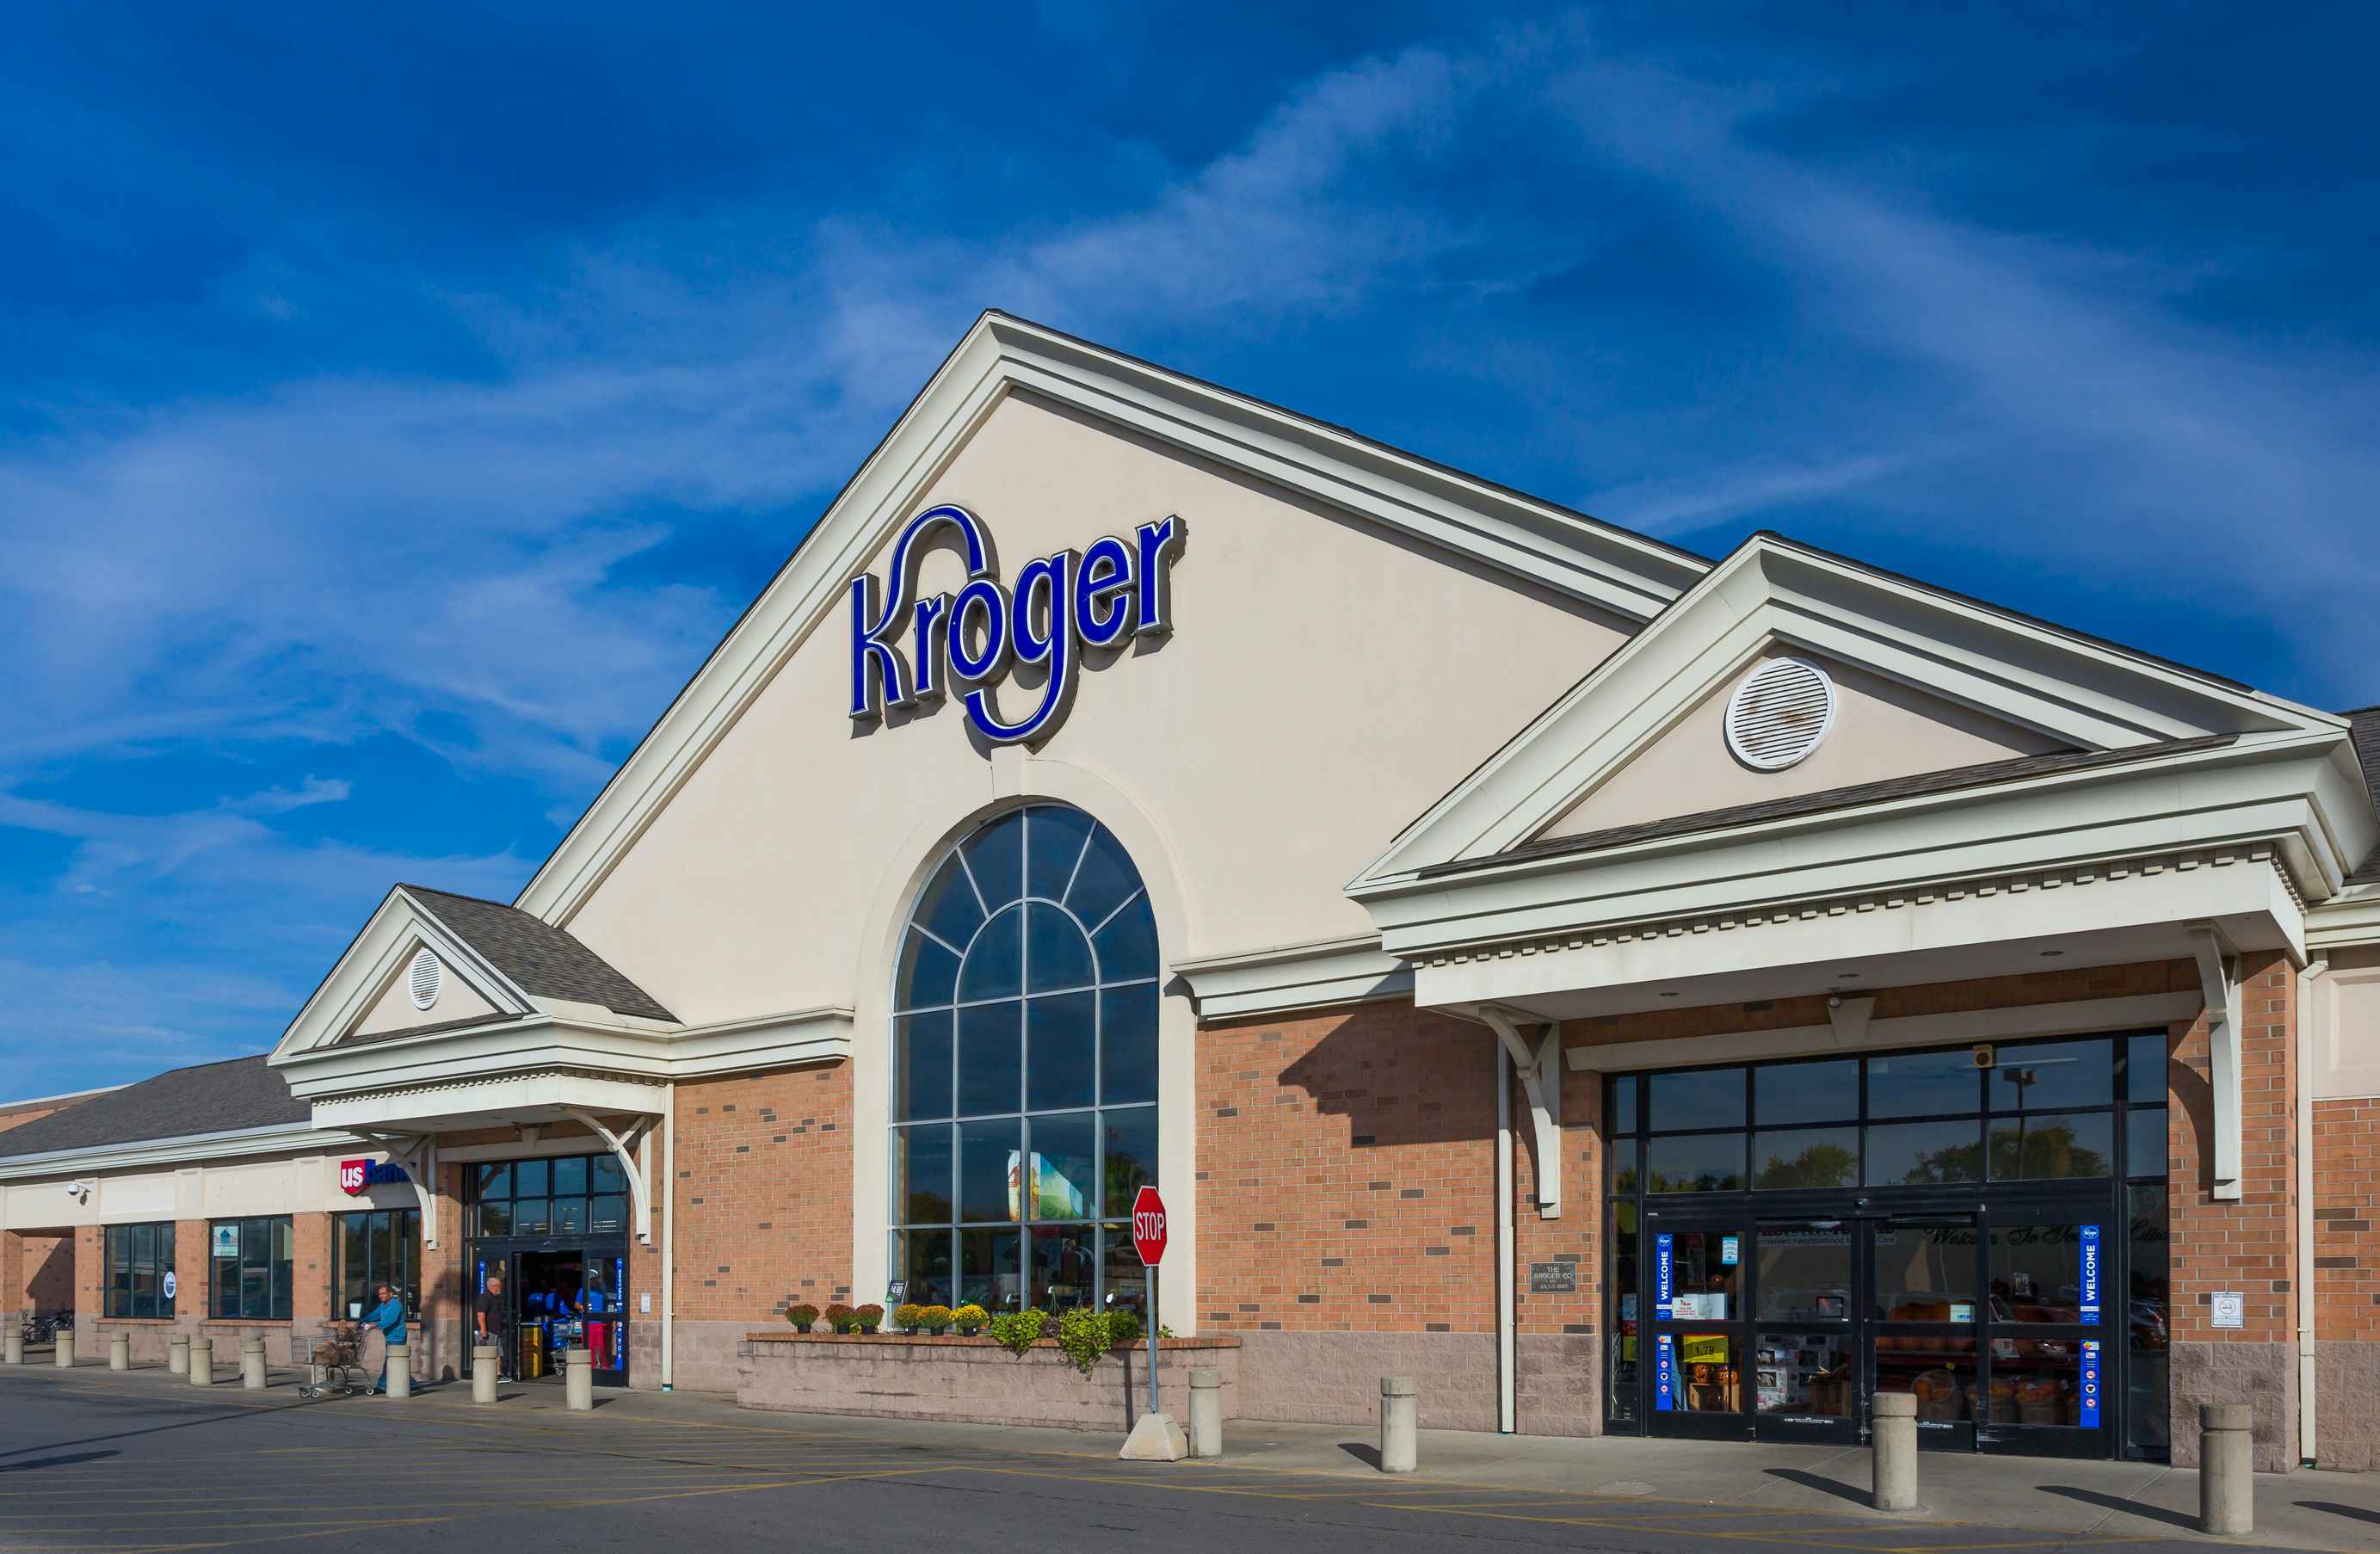 kroger storefront entrance with arched window